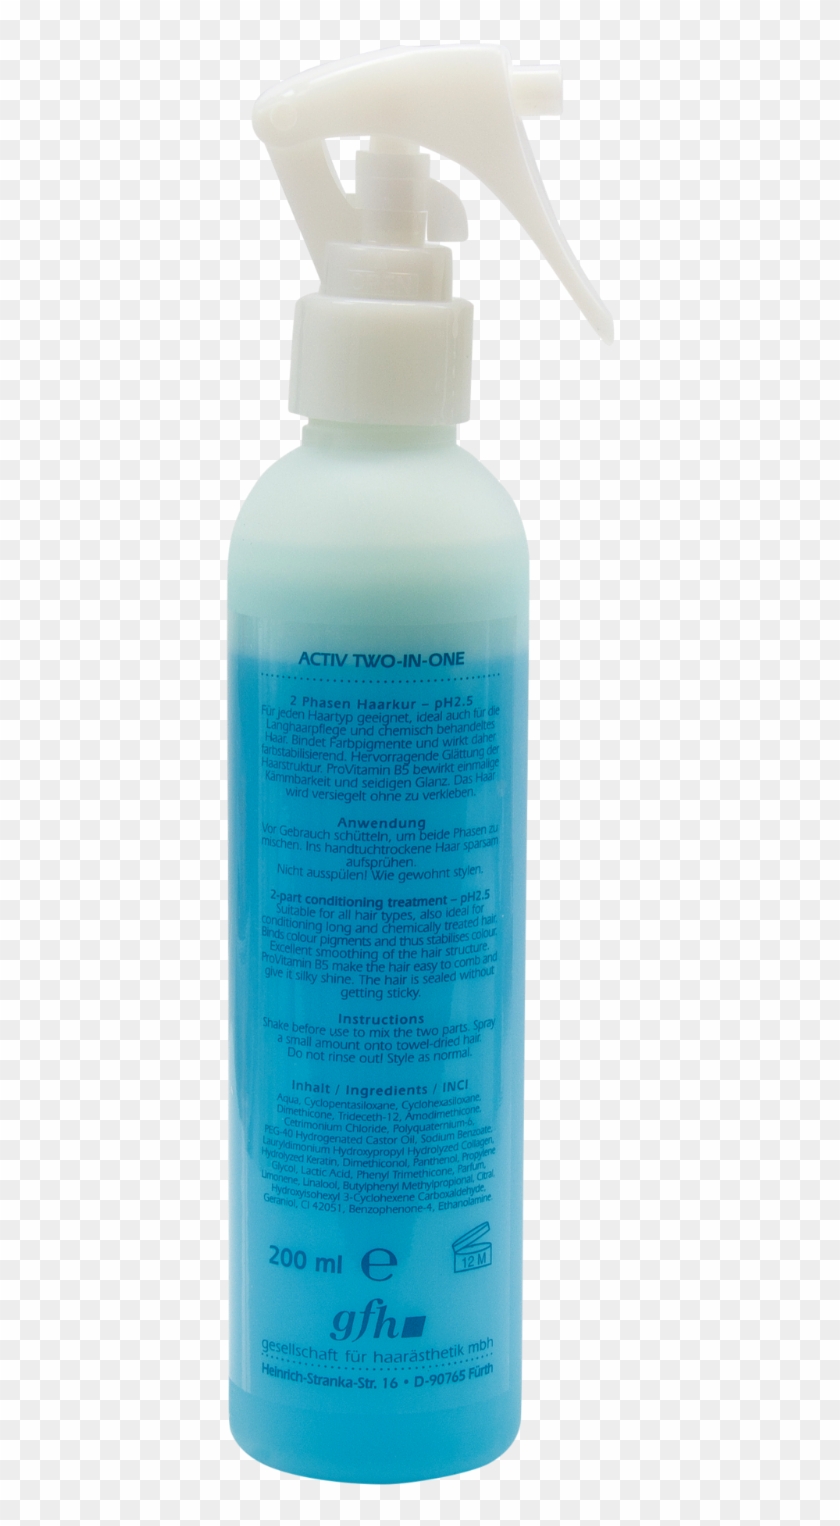 Gfh Activ Two In One Conditioner 200ml For Human Hair - Plastic Bottle Clipart